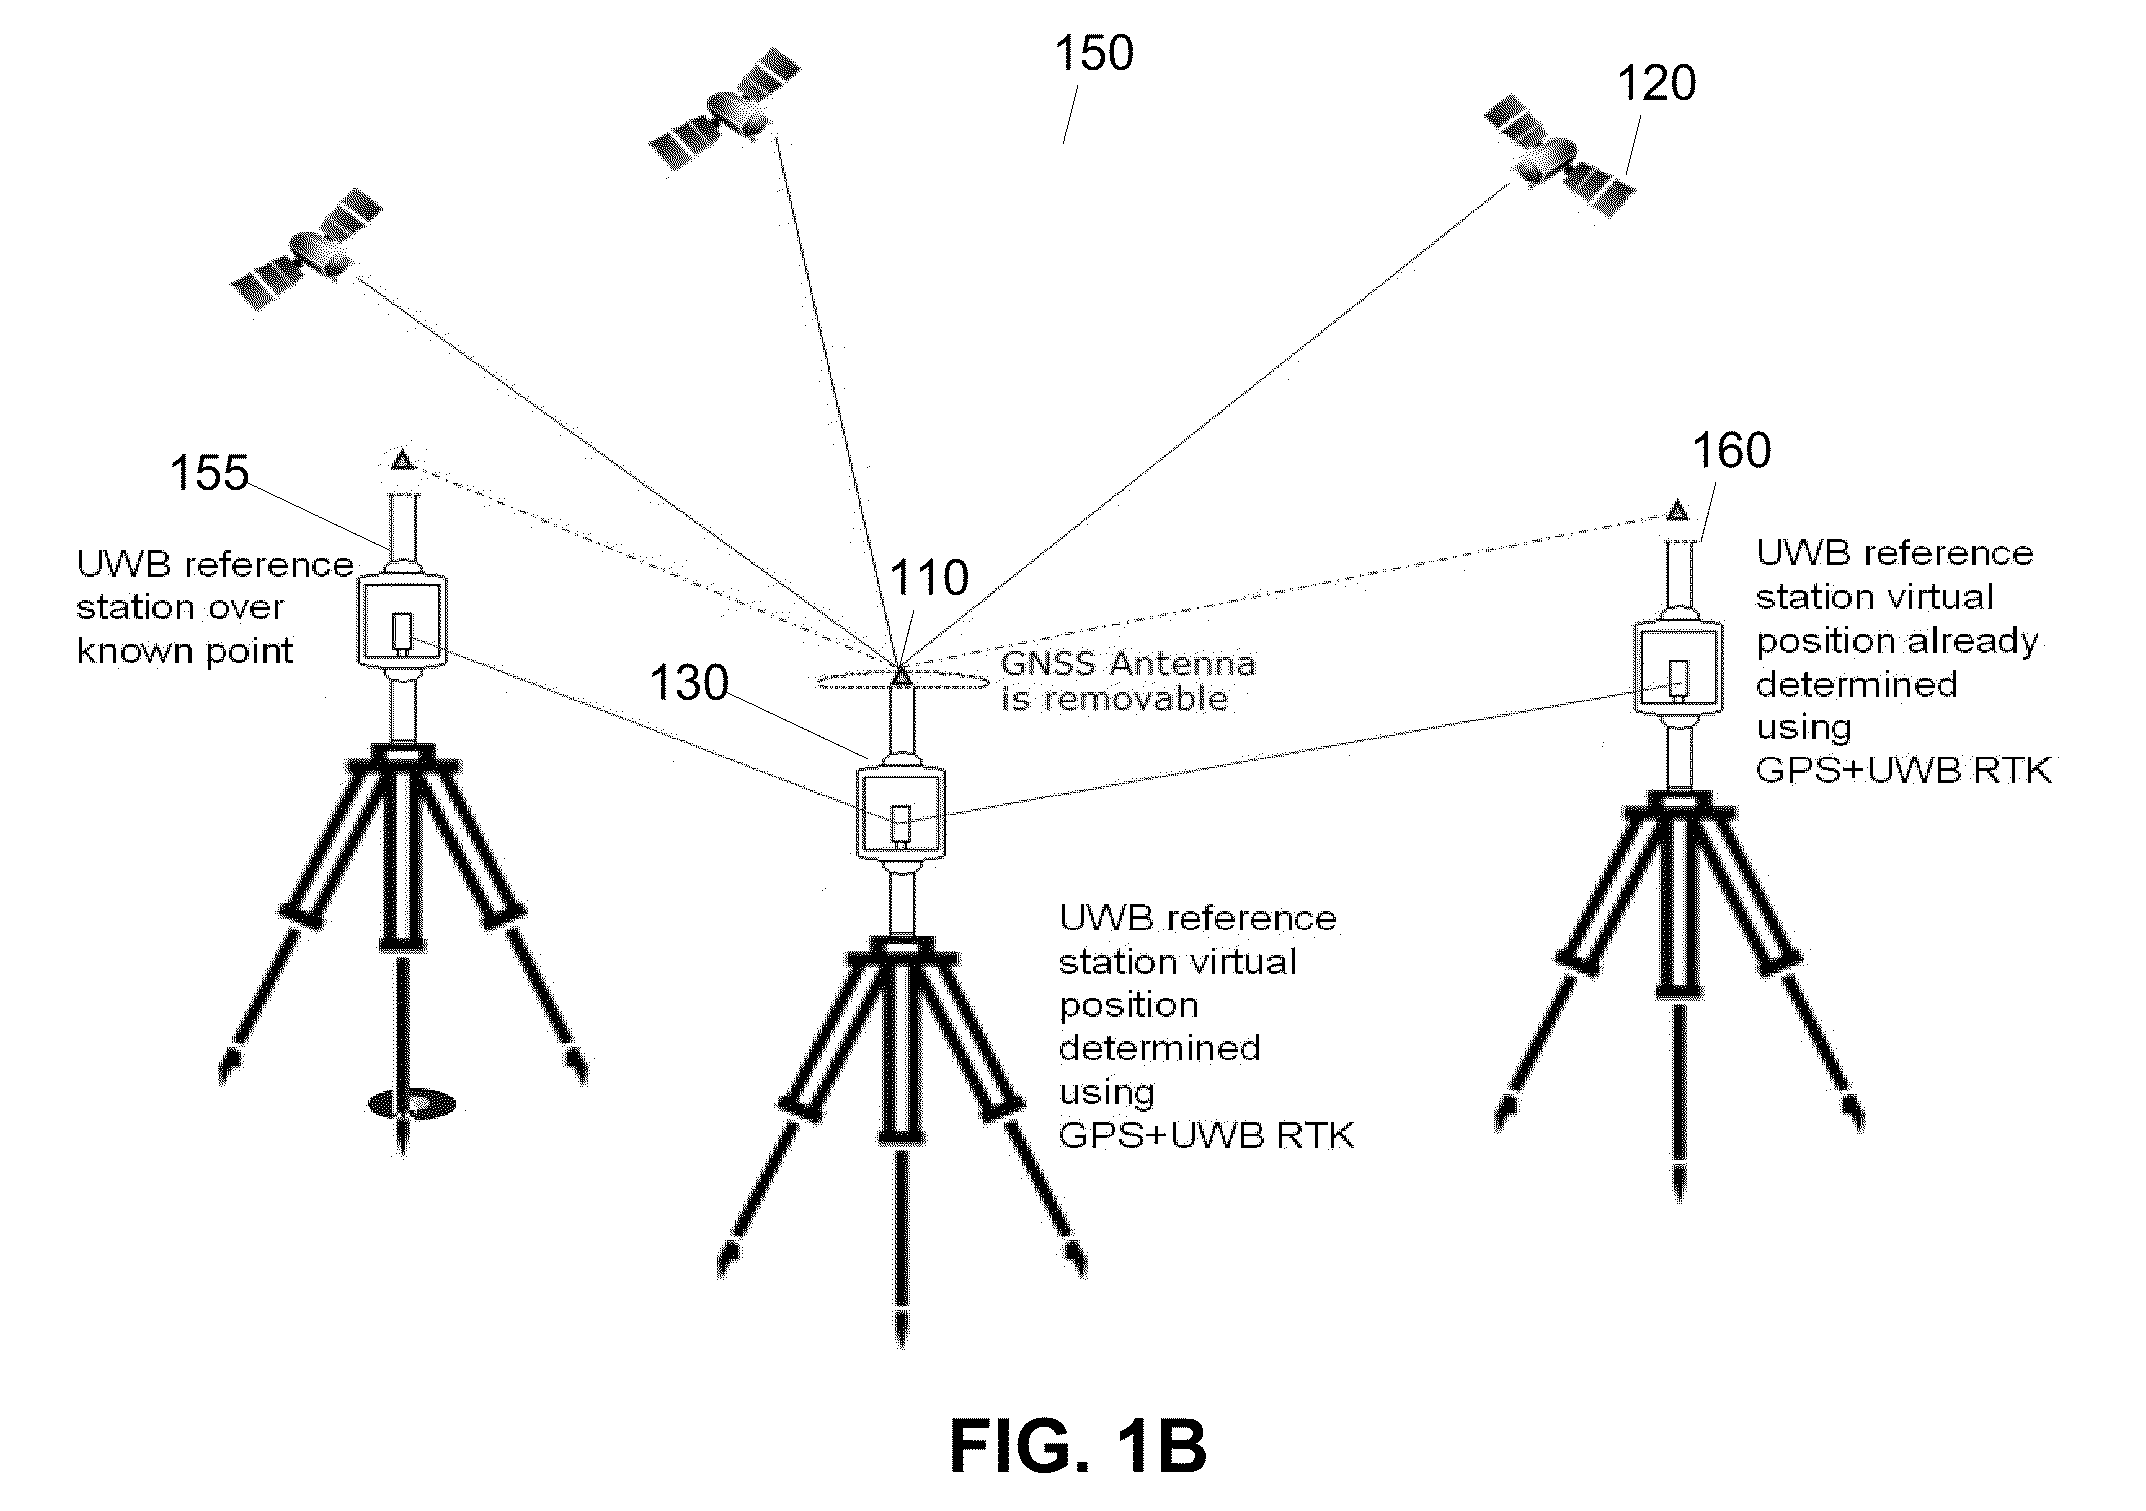 System and Methods for Real Time Kinematic Surveying Using GNSS and Ultra Wideband Ranging